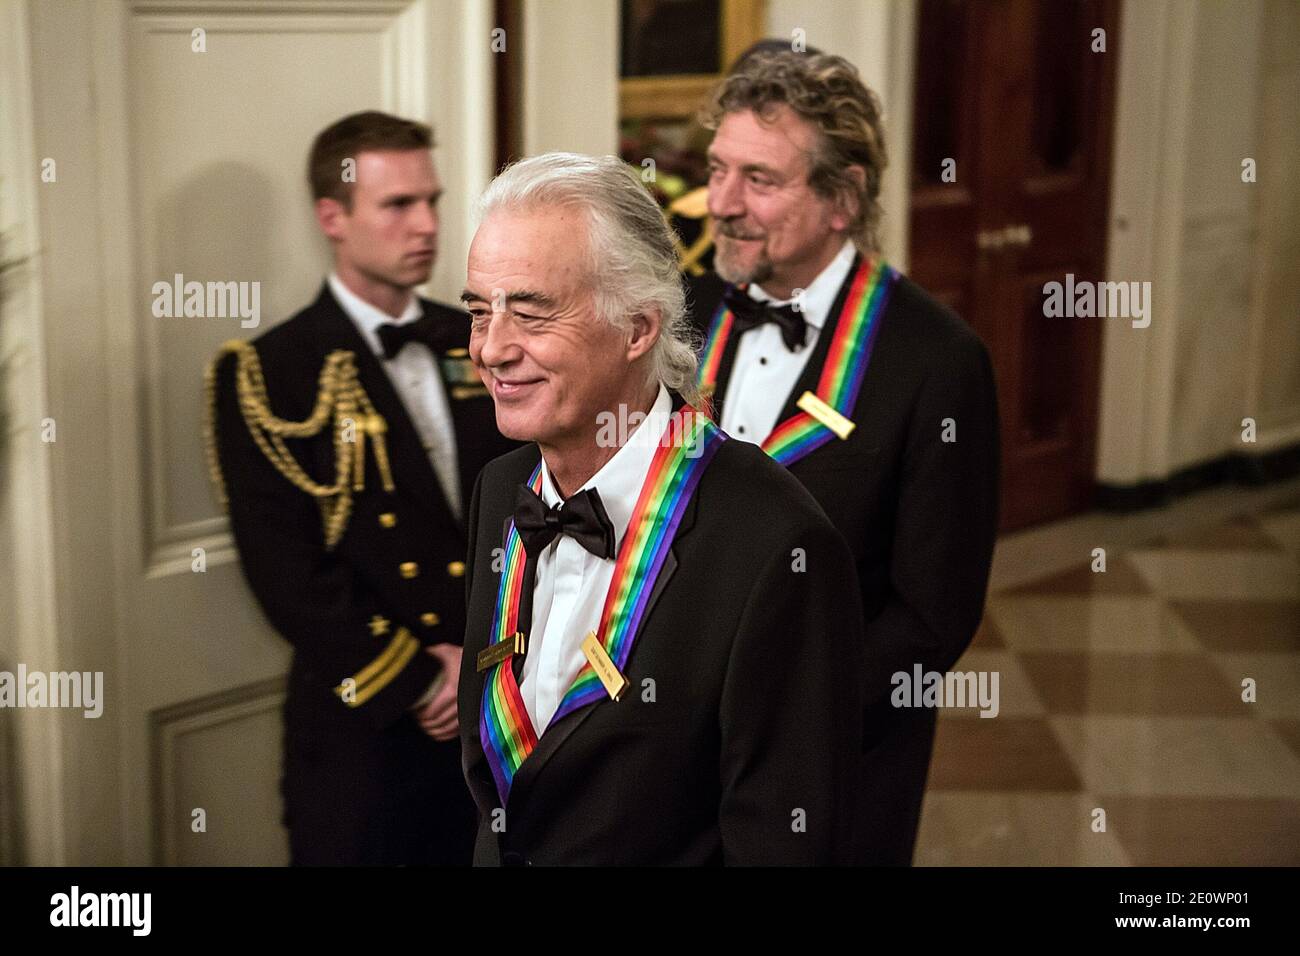 Jimmy Page (L) and Robert Plant of the band Led Zeppelin attend the Kennedy  Center Honors reception at the White House in Washington, DC, USA, on  December 2, 2012. The Kennedy Center